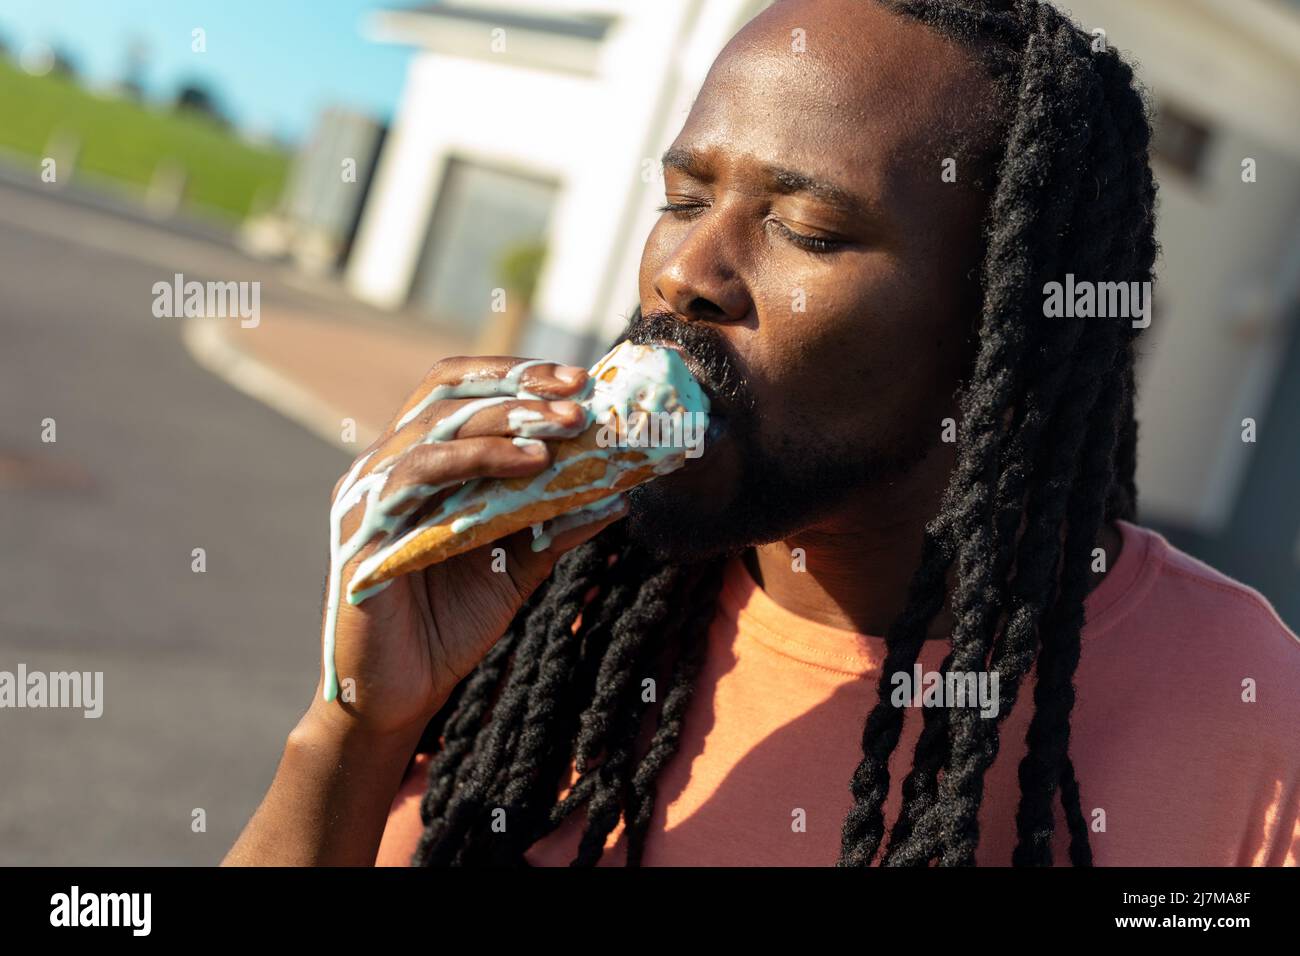 African american man eating melting ice cream with messy hand on sunny day Stock Photo